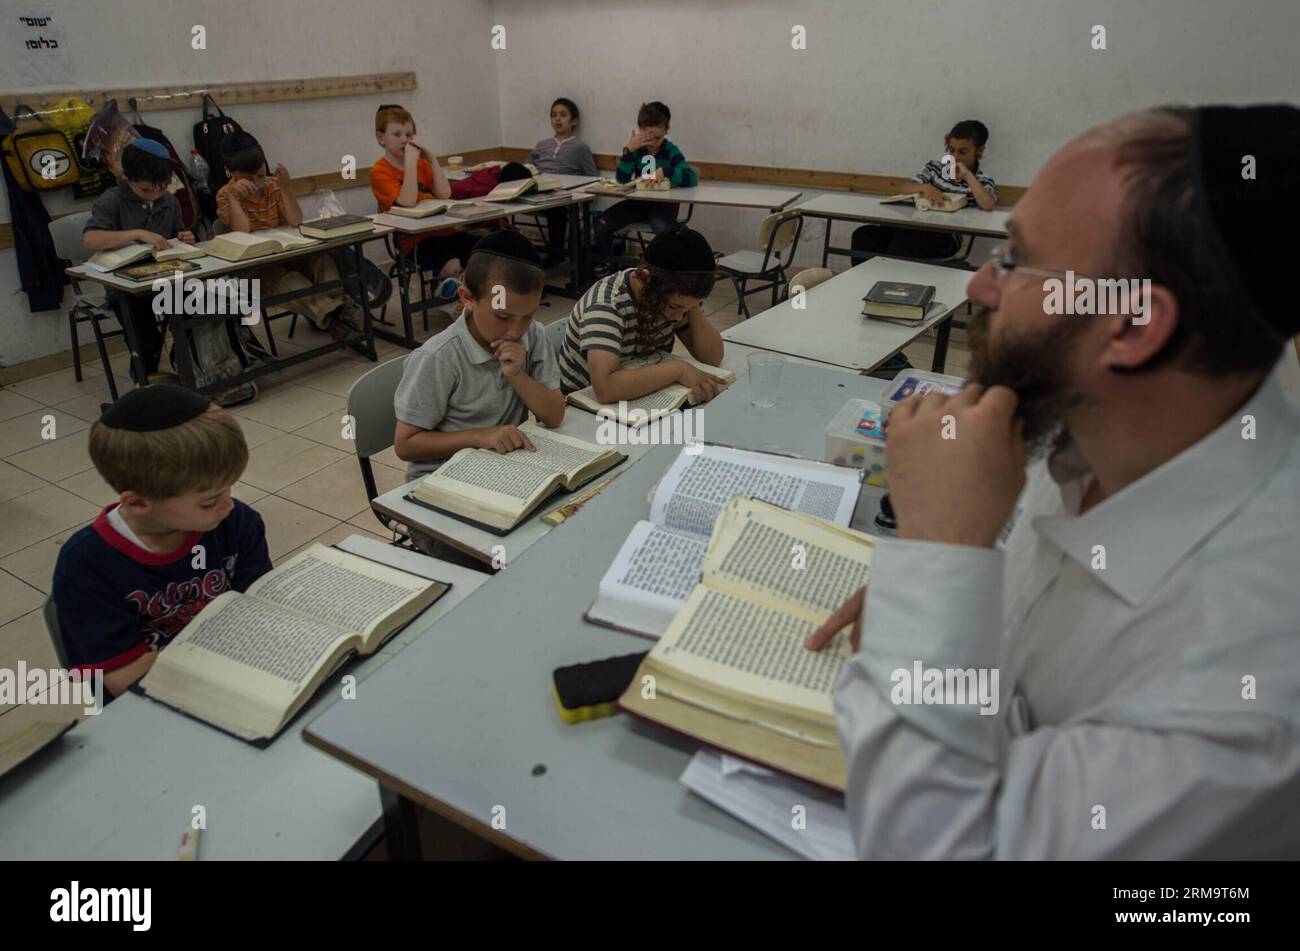 Orthodox Jewish pupils take a class of Jewish religion at Torat Moshe elementary school in Beit Shemesh, about 20 km from Jerusalem, on May 29, 2014. Tzviel Noyman is an Israeli Ultra-Orthodox boy in a family with six children, three boys and three girls. He is ten years old this year and a grade three pupil of Torat Moshe elementary school, which is only opened to Jewish children. Tzviel has eight classes each day, including Hebrew, English, mathematics and Jewish religion, which has four classes each day including Talmud, Mishnah and Gemara. Tzviel likes the religion class best because he th Stock Photo